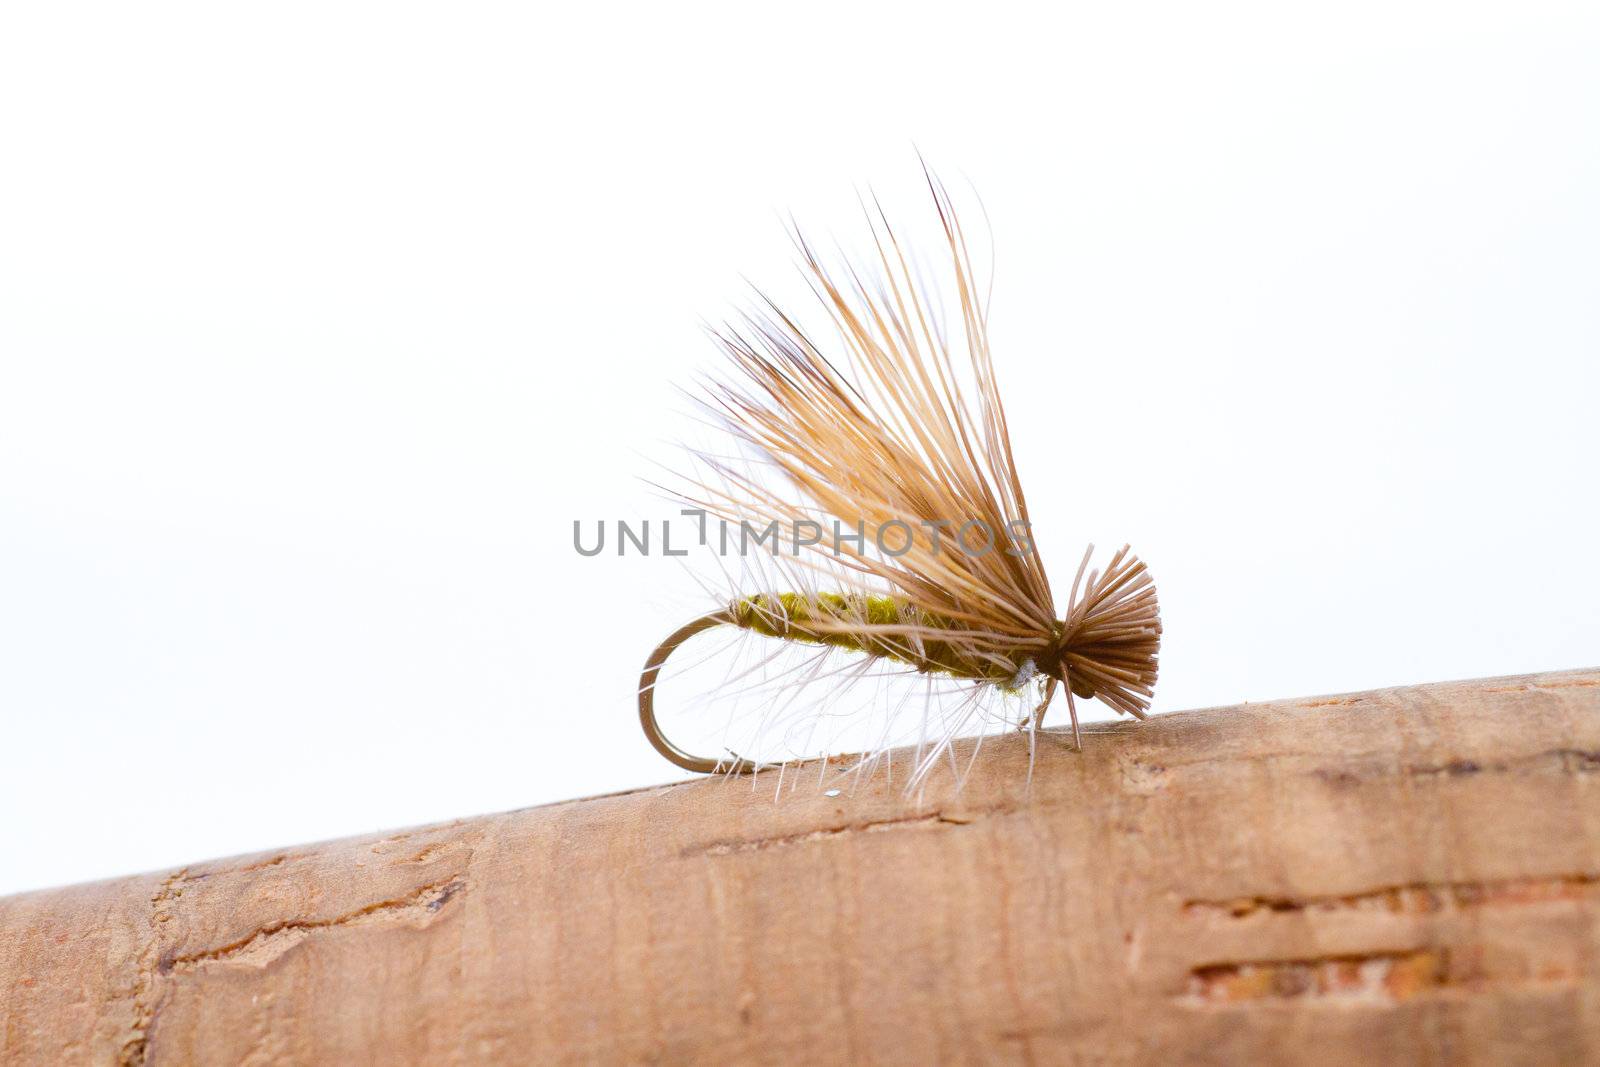 This caddis imitation is made of deer hair and elk hair and tied in an artistic way to attract fish while fishing in lakes streams rivers and creeks on the surface of the water.